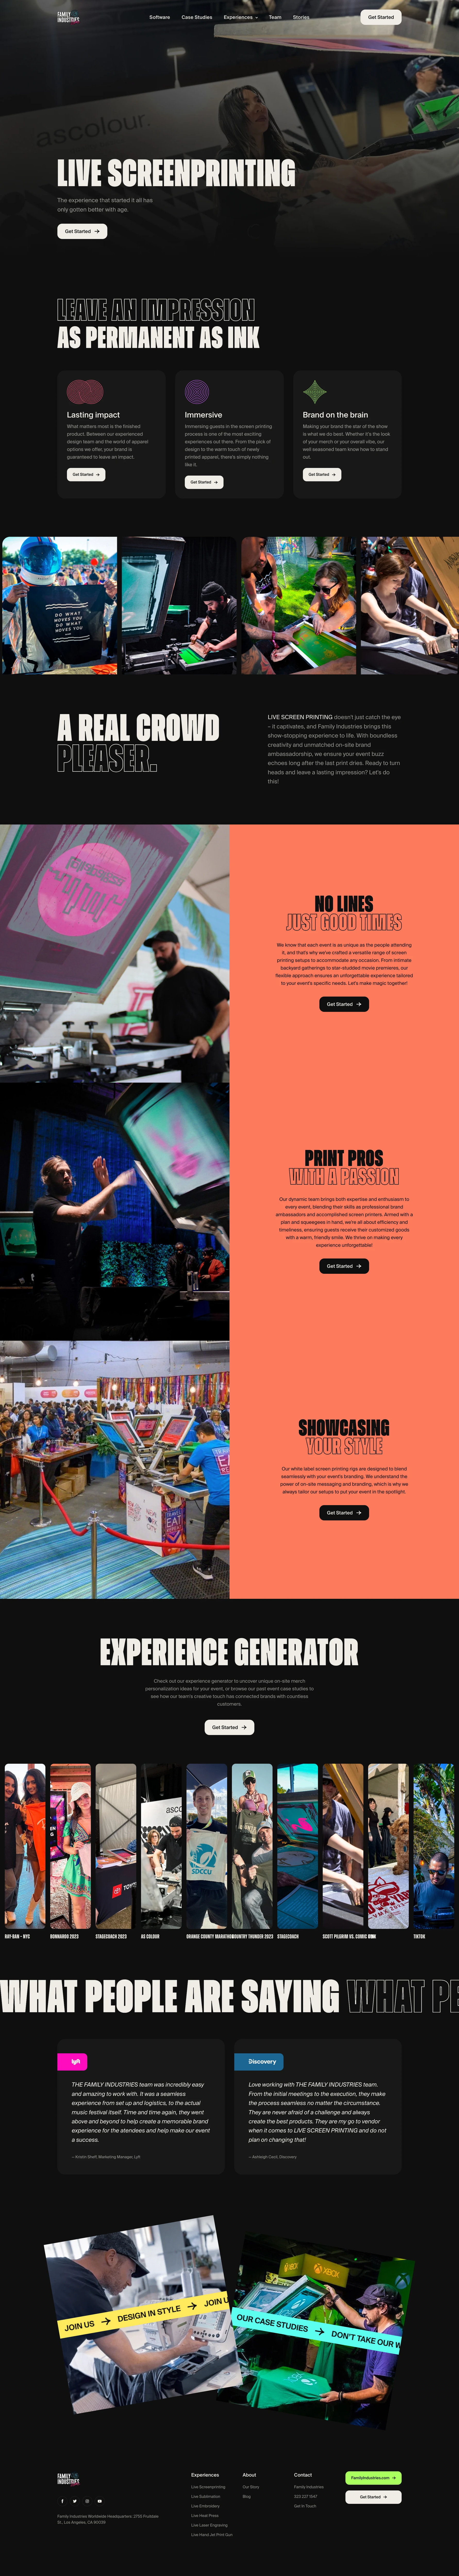 Family Industries Live Landing Page Example: On-site customization and gifting featuring live screen printing, live sublimation, live embroidery, live heat press, live laser engraving, hand jet printing, and virtual events customizations.